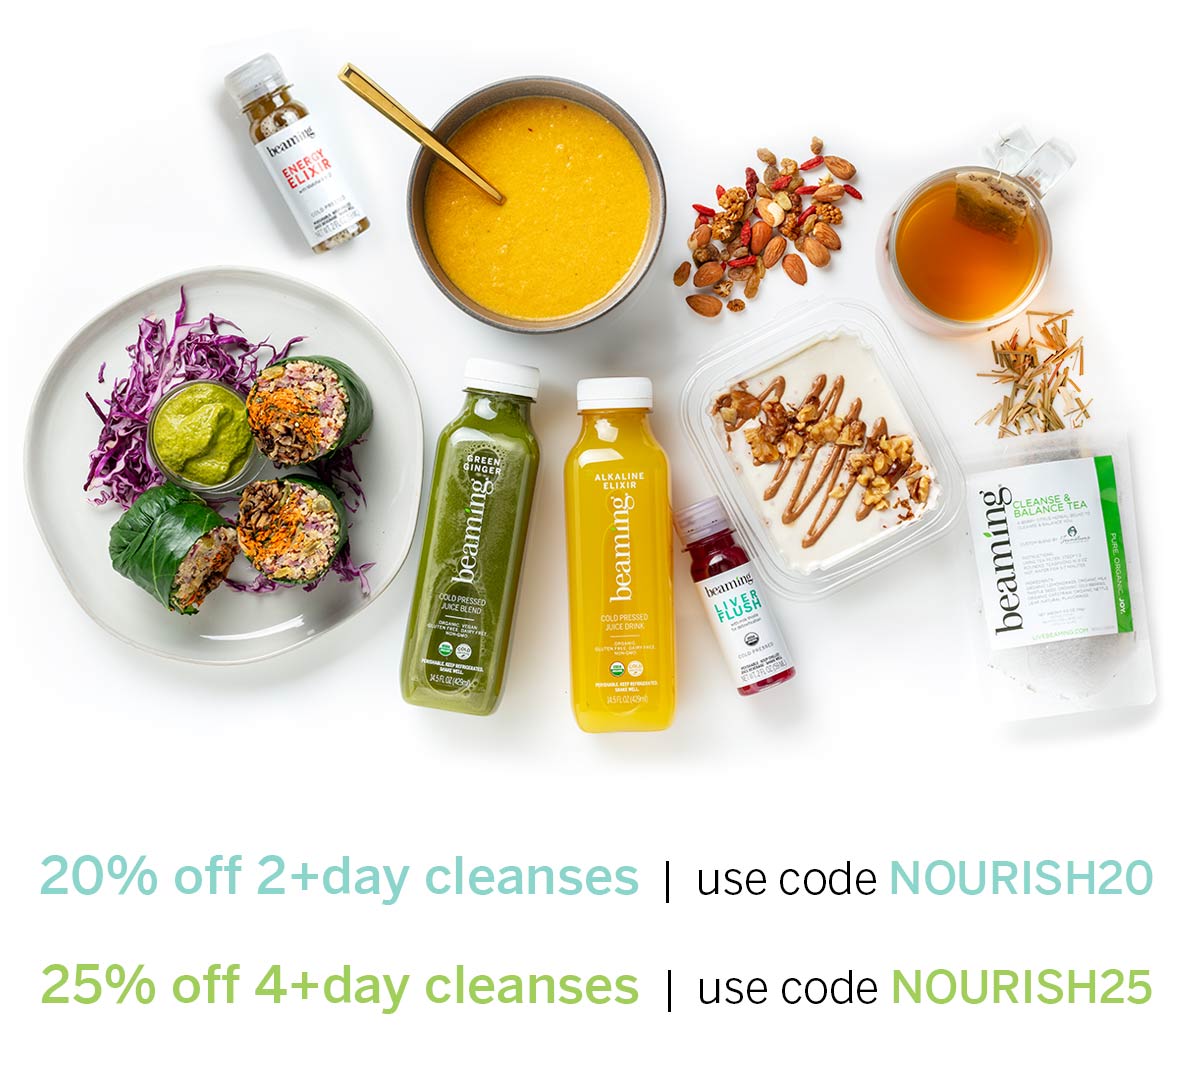 20% off 2+Day Cleanses use code NOURISH20 | 25% off 4+Day Cleanses use code NOURISH25